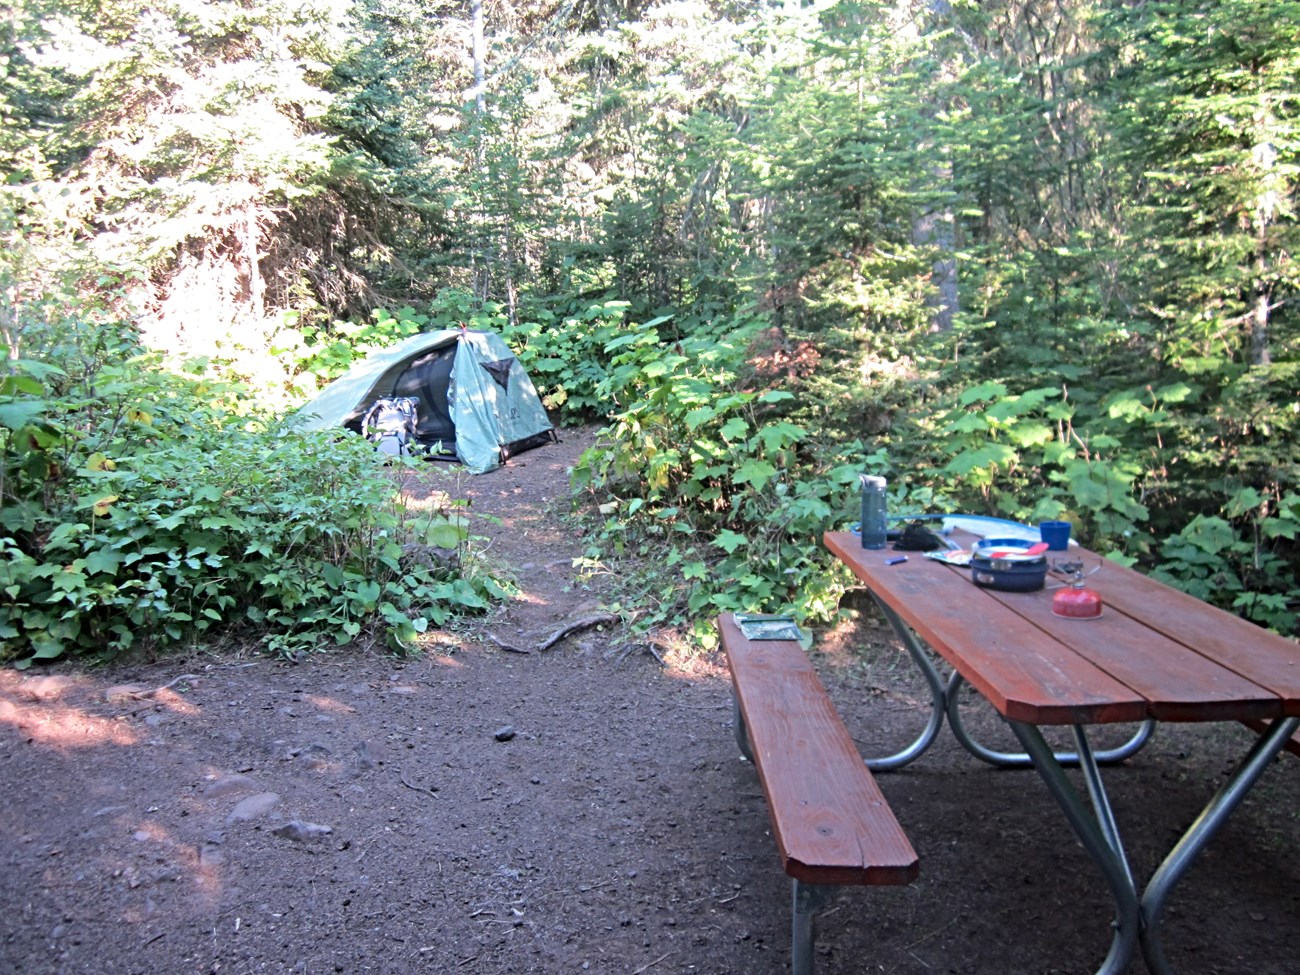 A campsite comprised of a tent, backpack, picnic table, and gear are surrounded by vegetation.